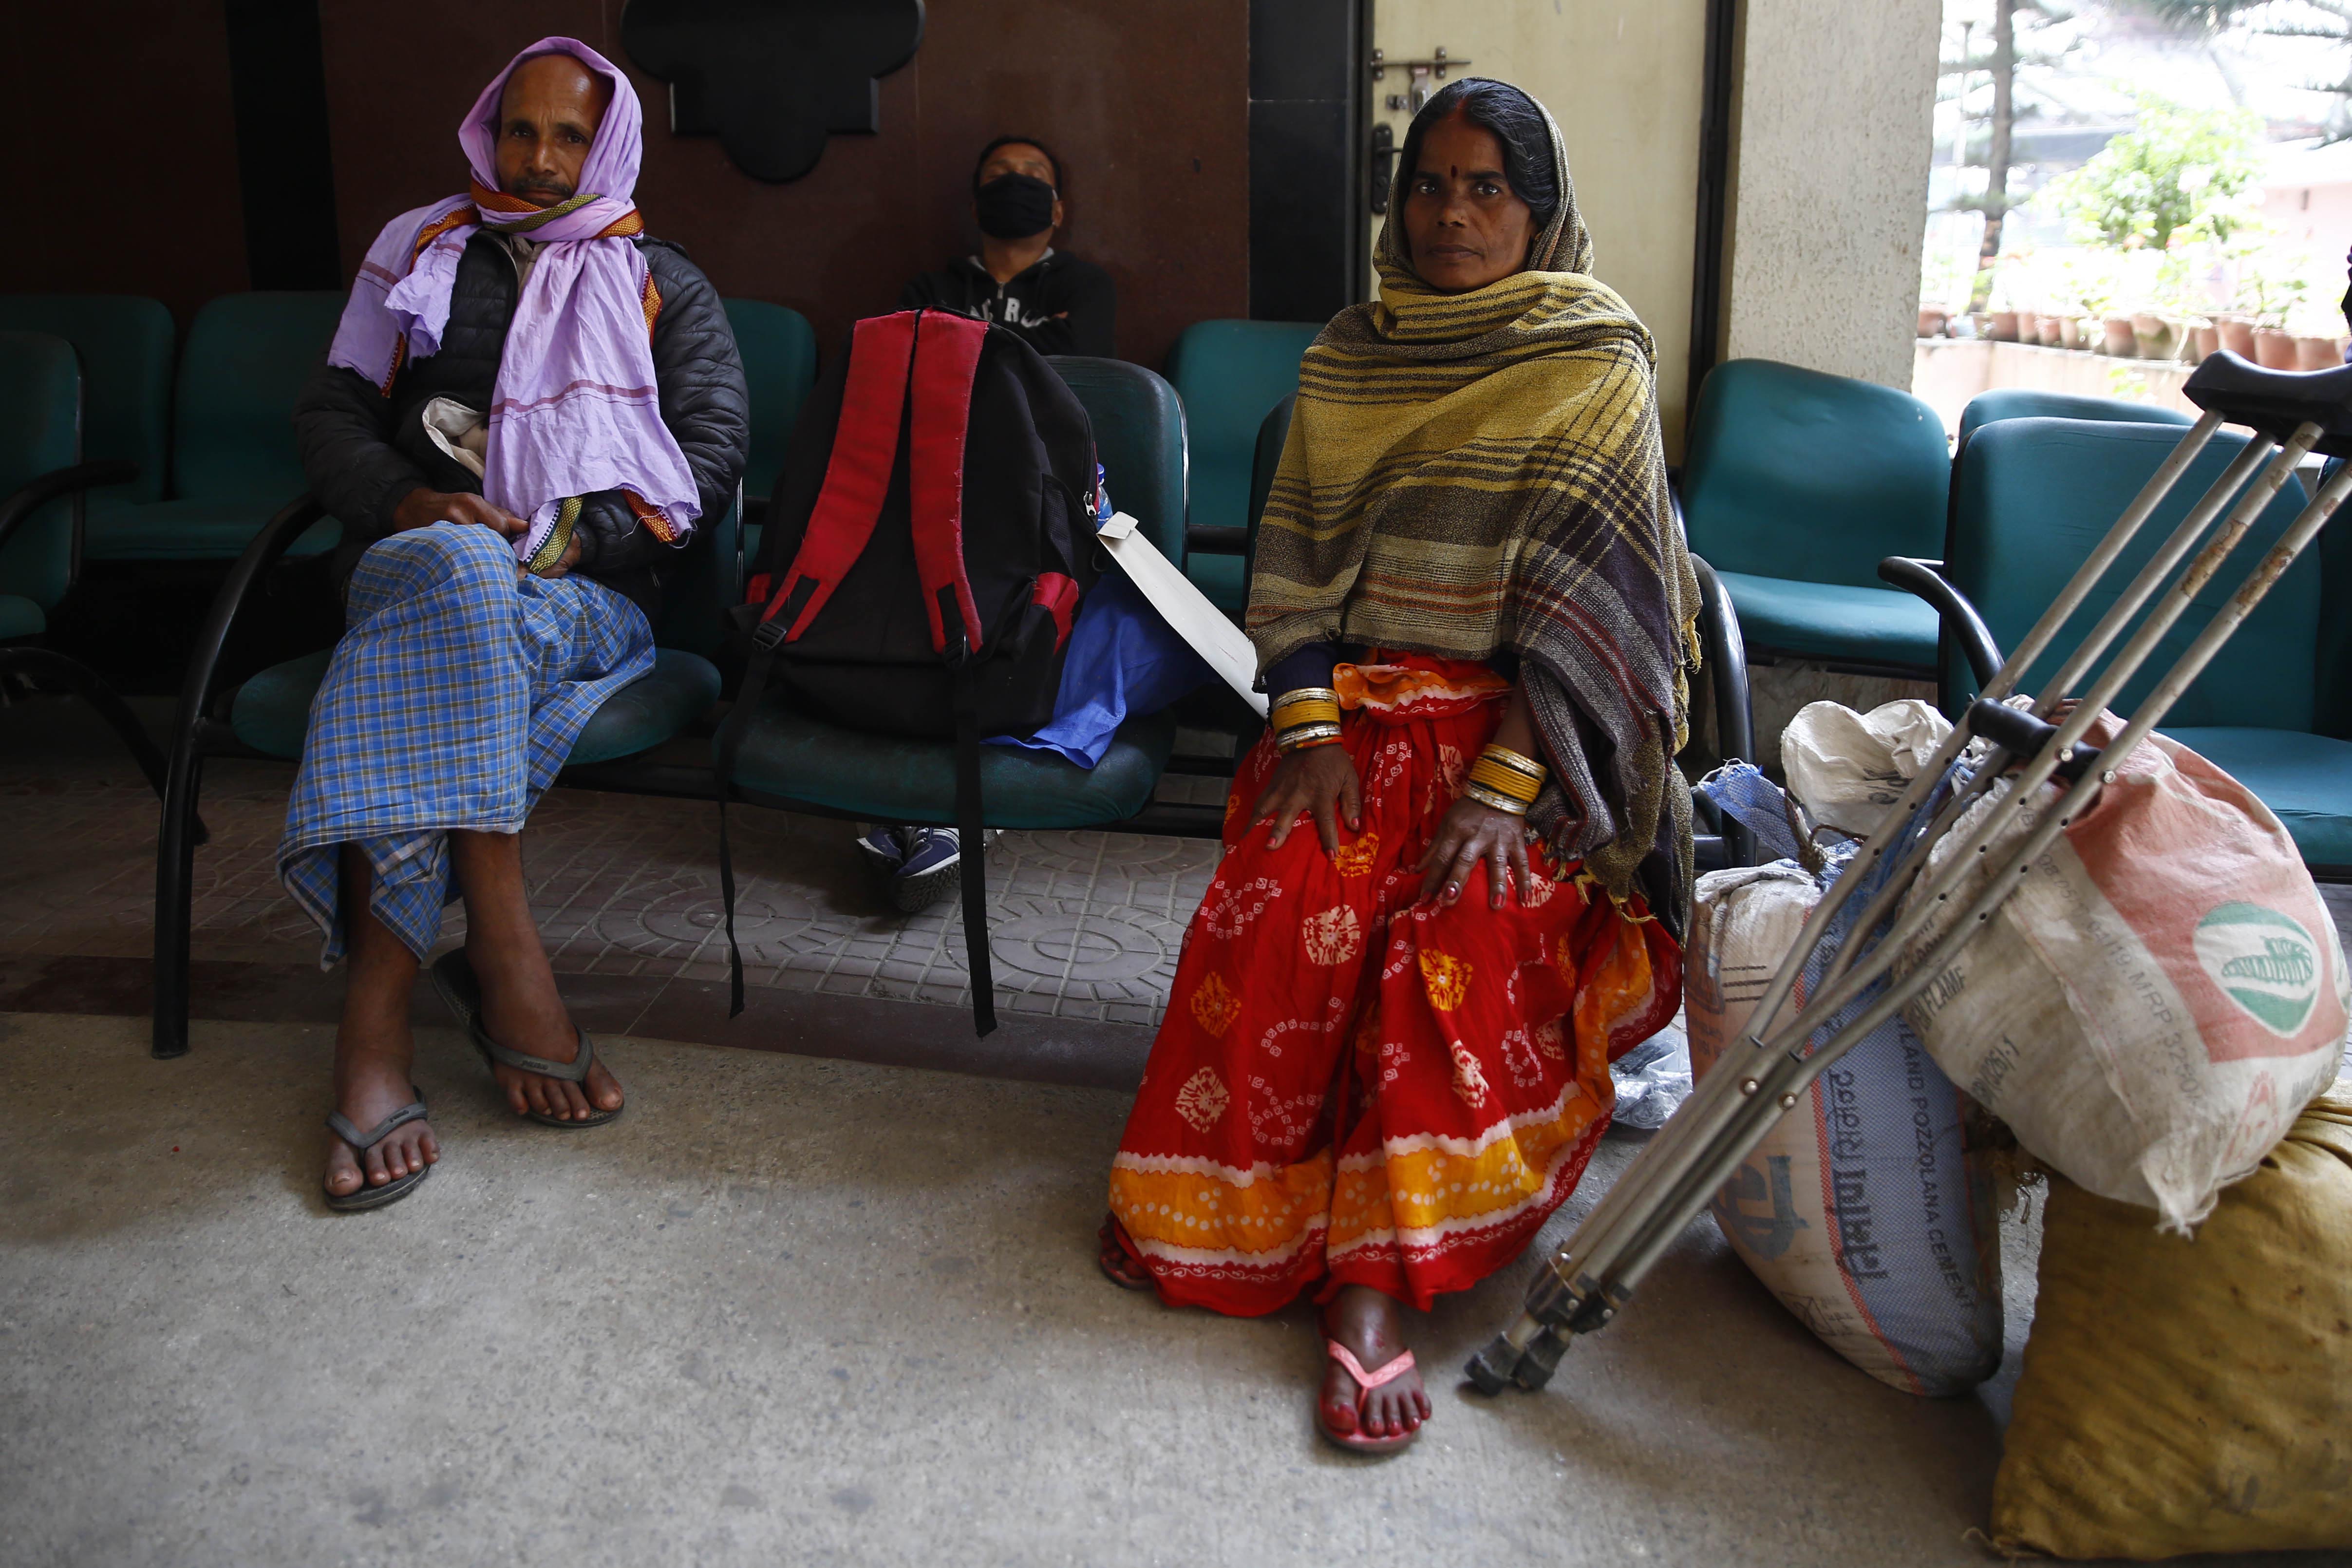 A man, along with his wife, who arrived from Rautahat district, waiting for the treatment of his wife’s leg at Trauma Centre, in Kathmandu, on Tuesday, April 9, 2019. Photo: Skanda Gautam/THT